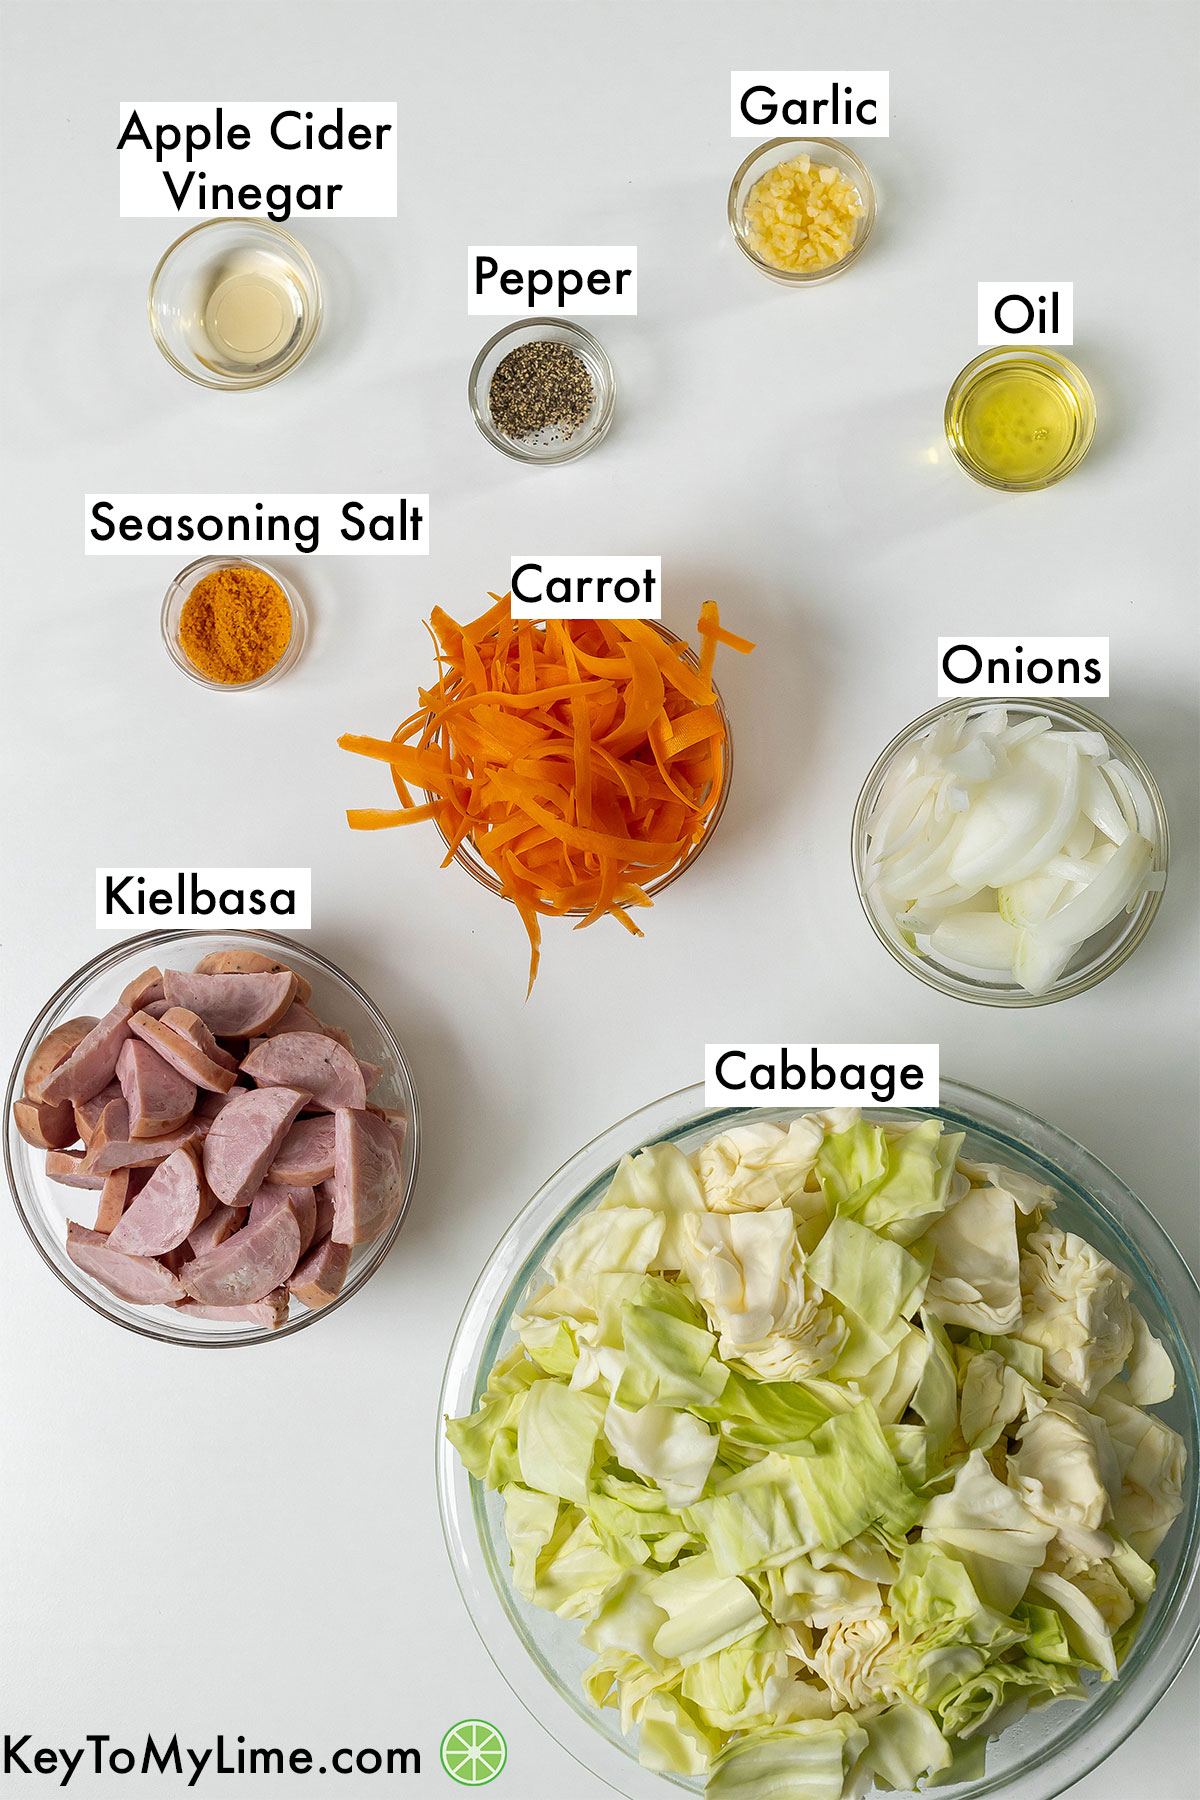 The labeled ingredients for cabbage and sausage.